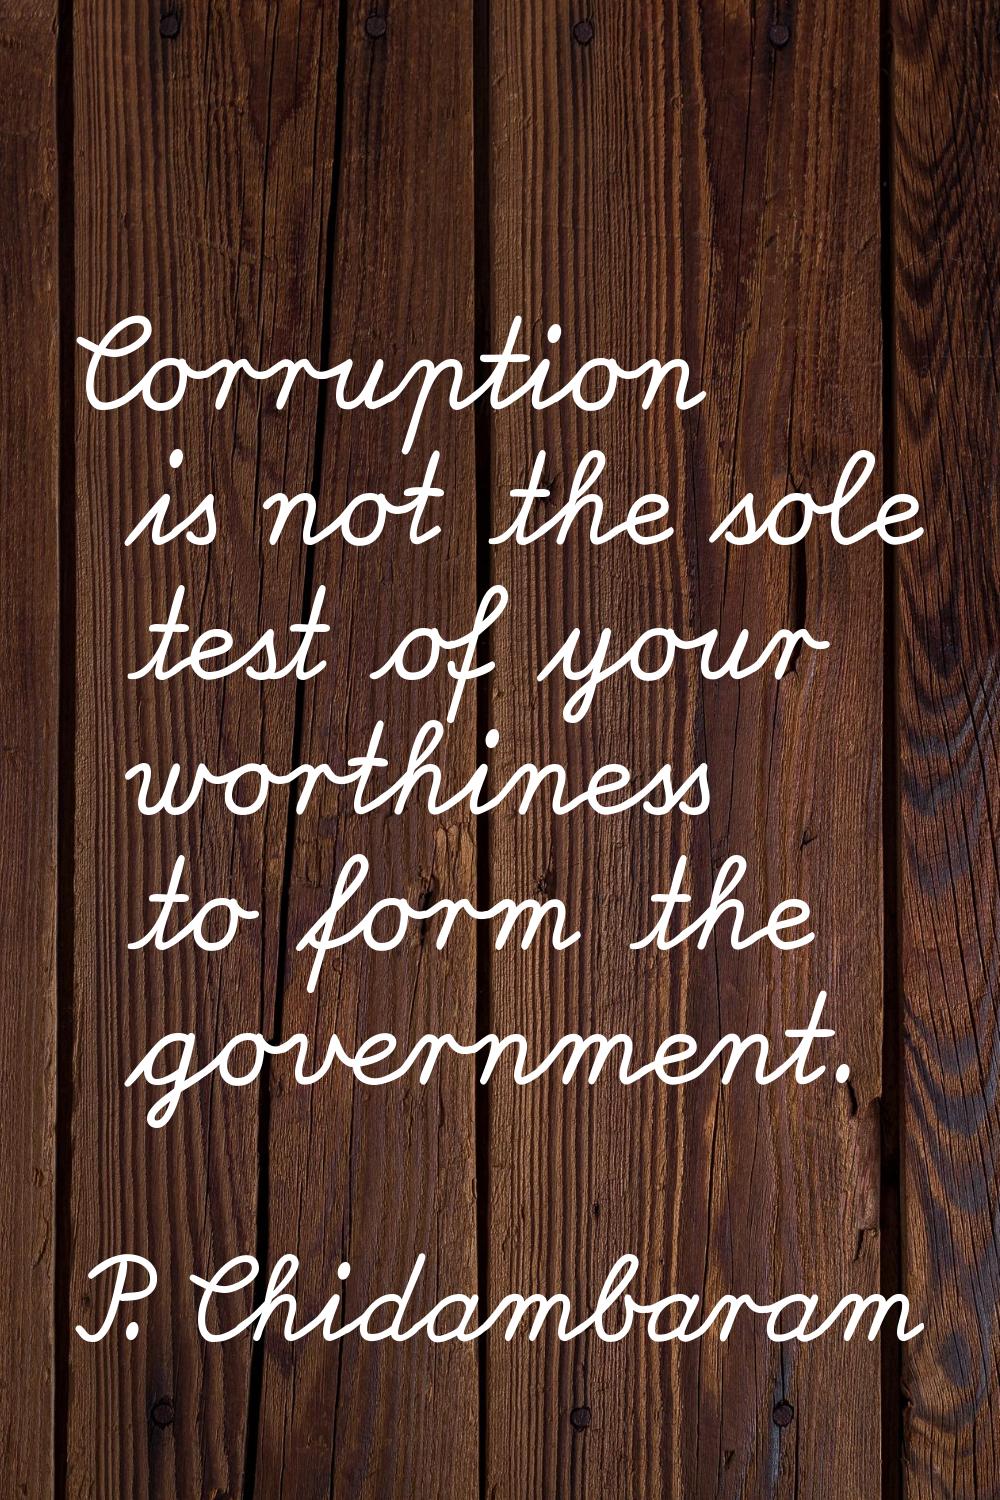 Corruption is not the sole test of your worthiness to form the government.